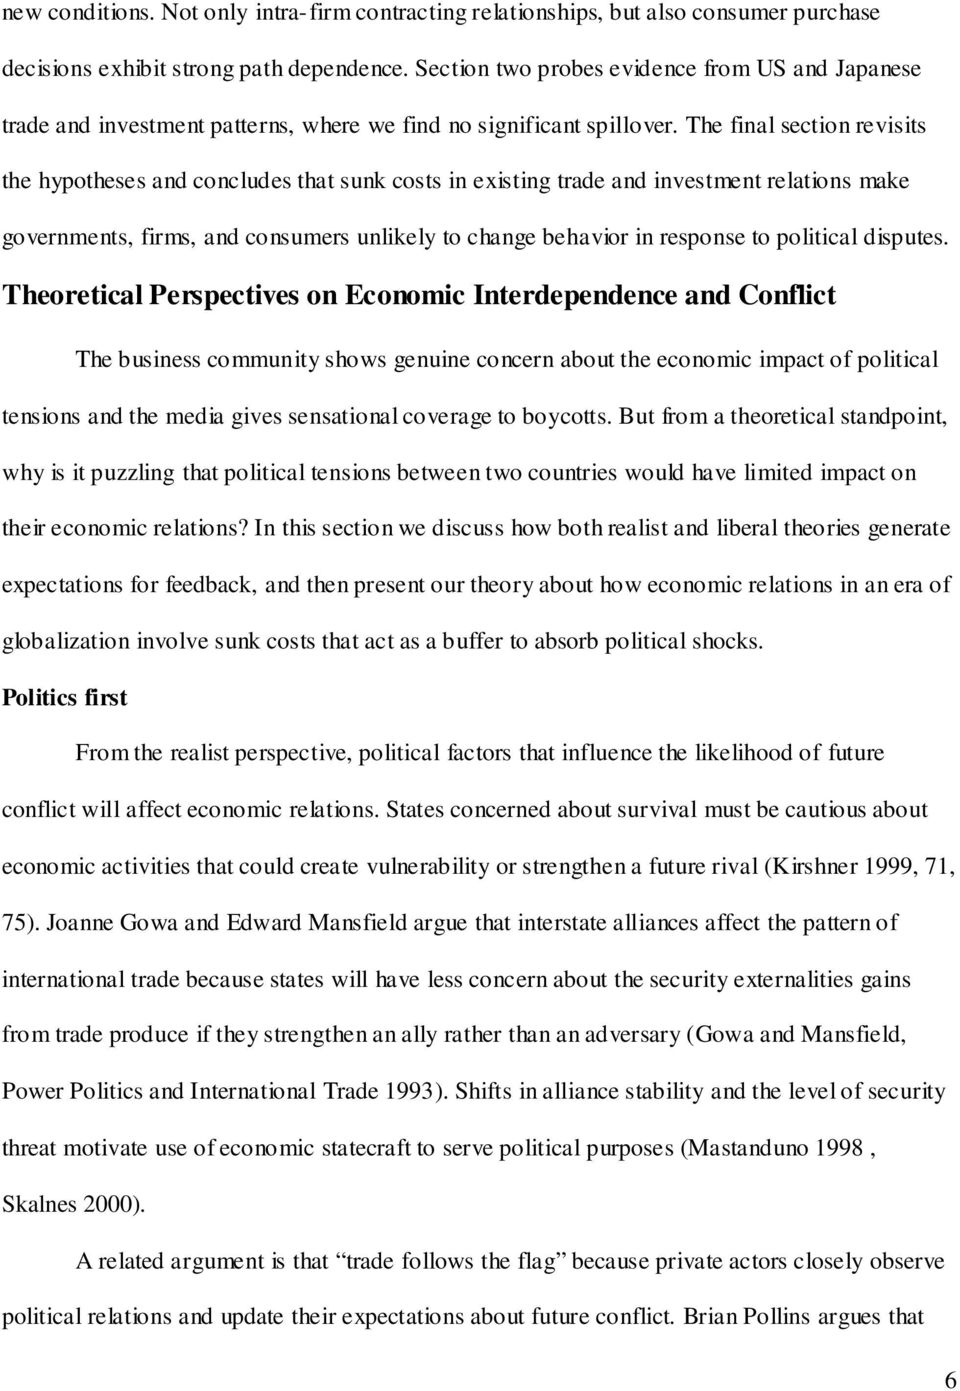 The final section revisits the hypotheses and concludes that sunk costs in existing trade and investment relations make governments, firms, and consumers unlikely to change behavior in response to